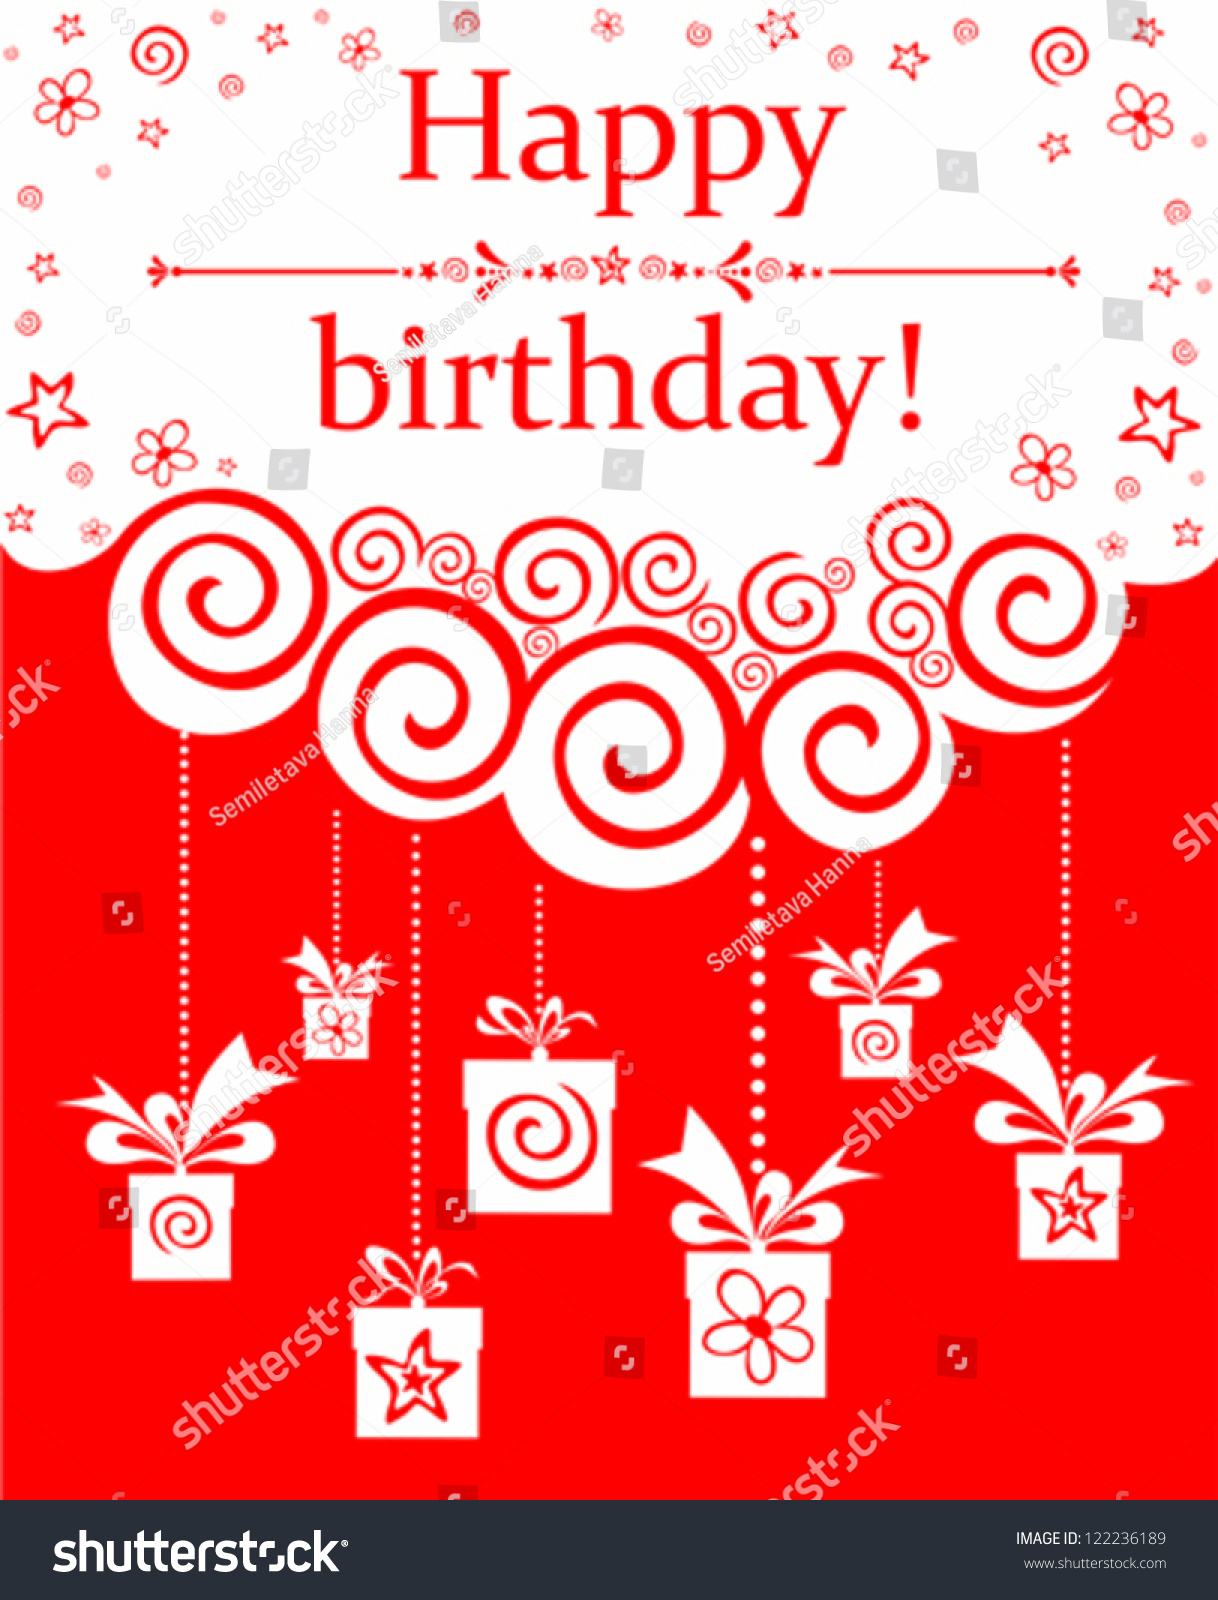 Happy Birthday Card. Celebration Red Background With Gift Boxes. Vector ...